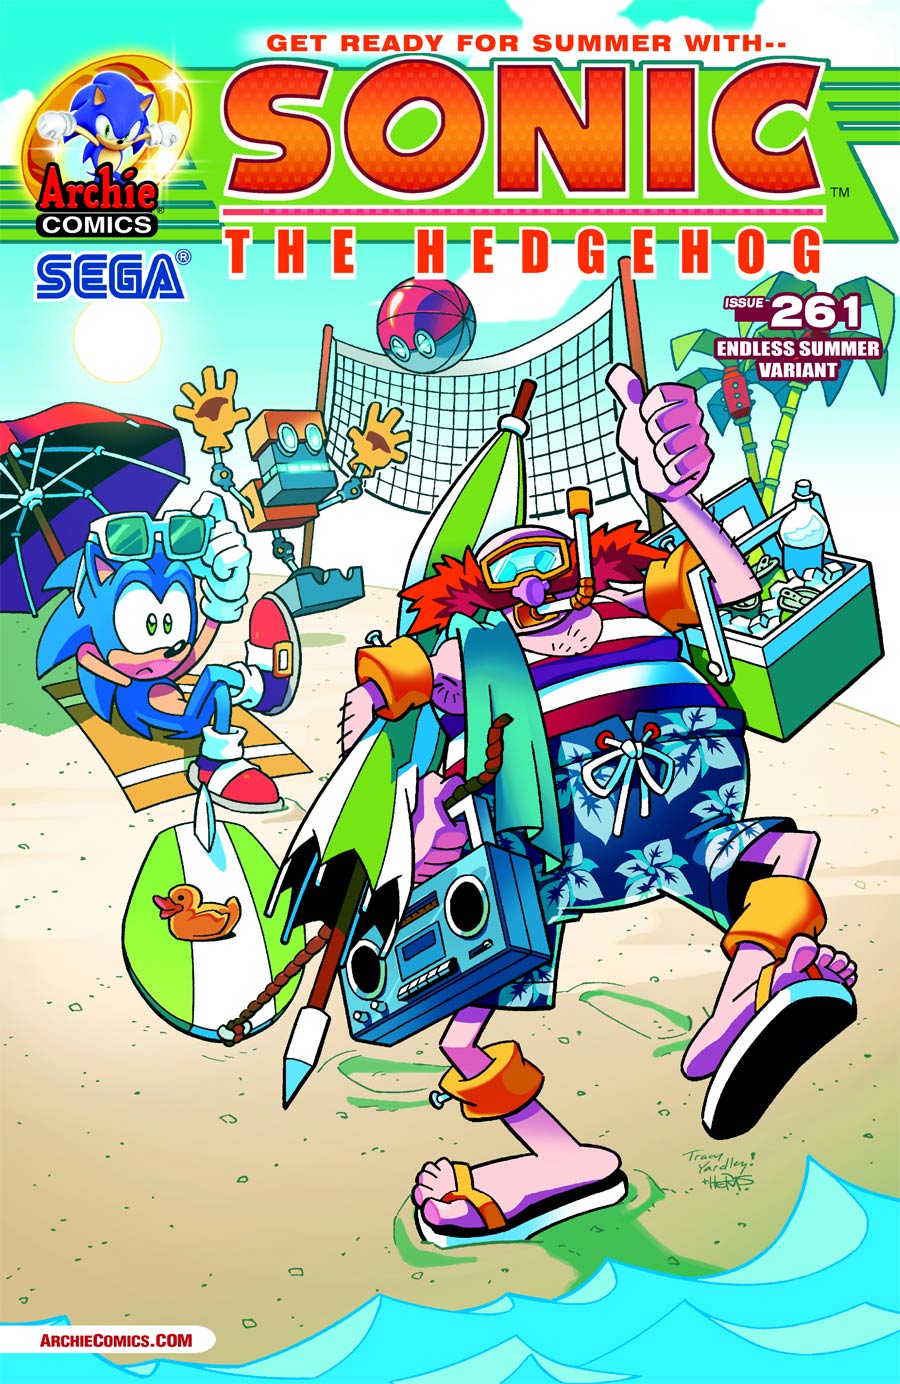 Sonic The Hedgehog Vol 2 #261 Cover B Variant Is It Summer Yet Cover